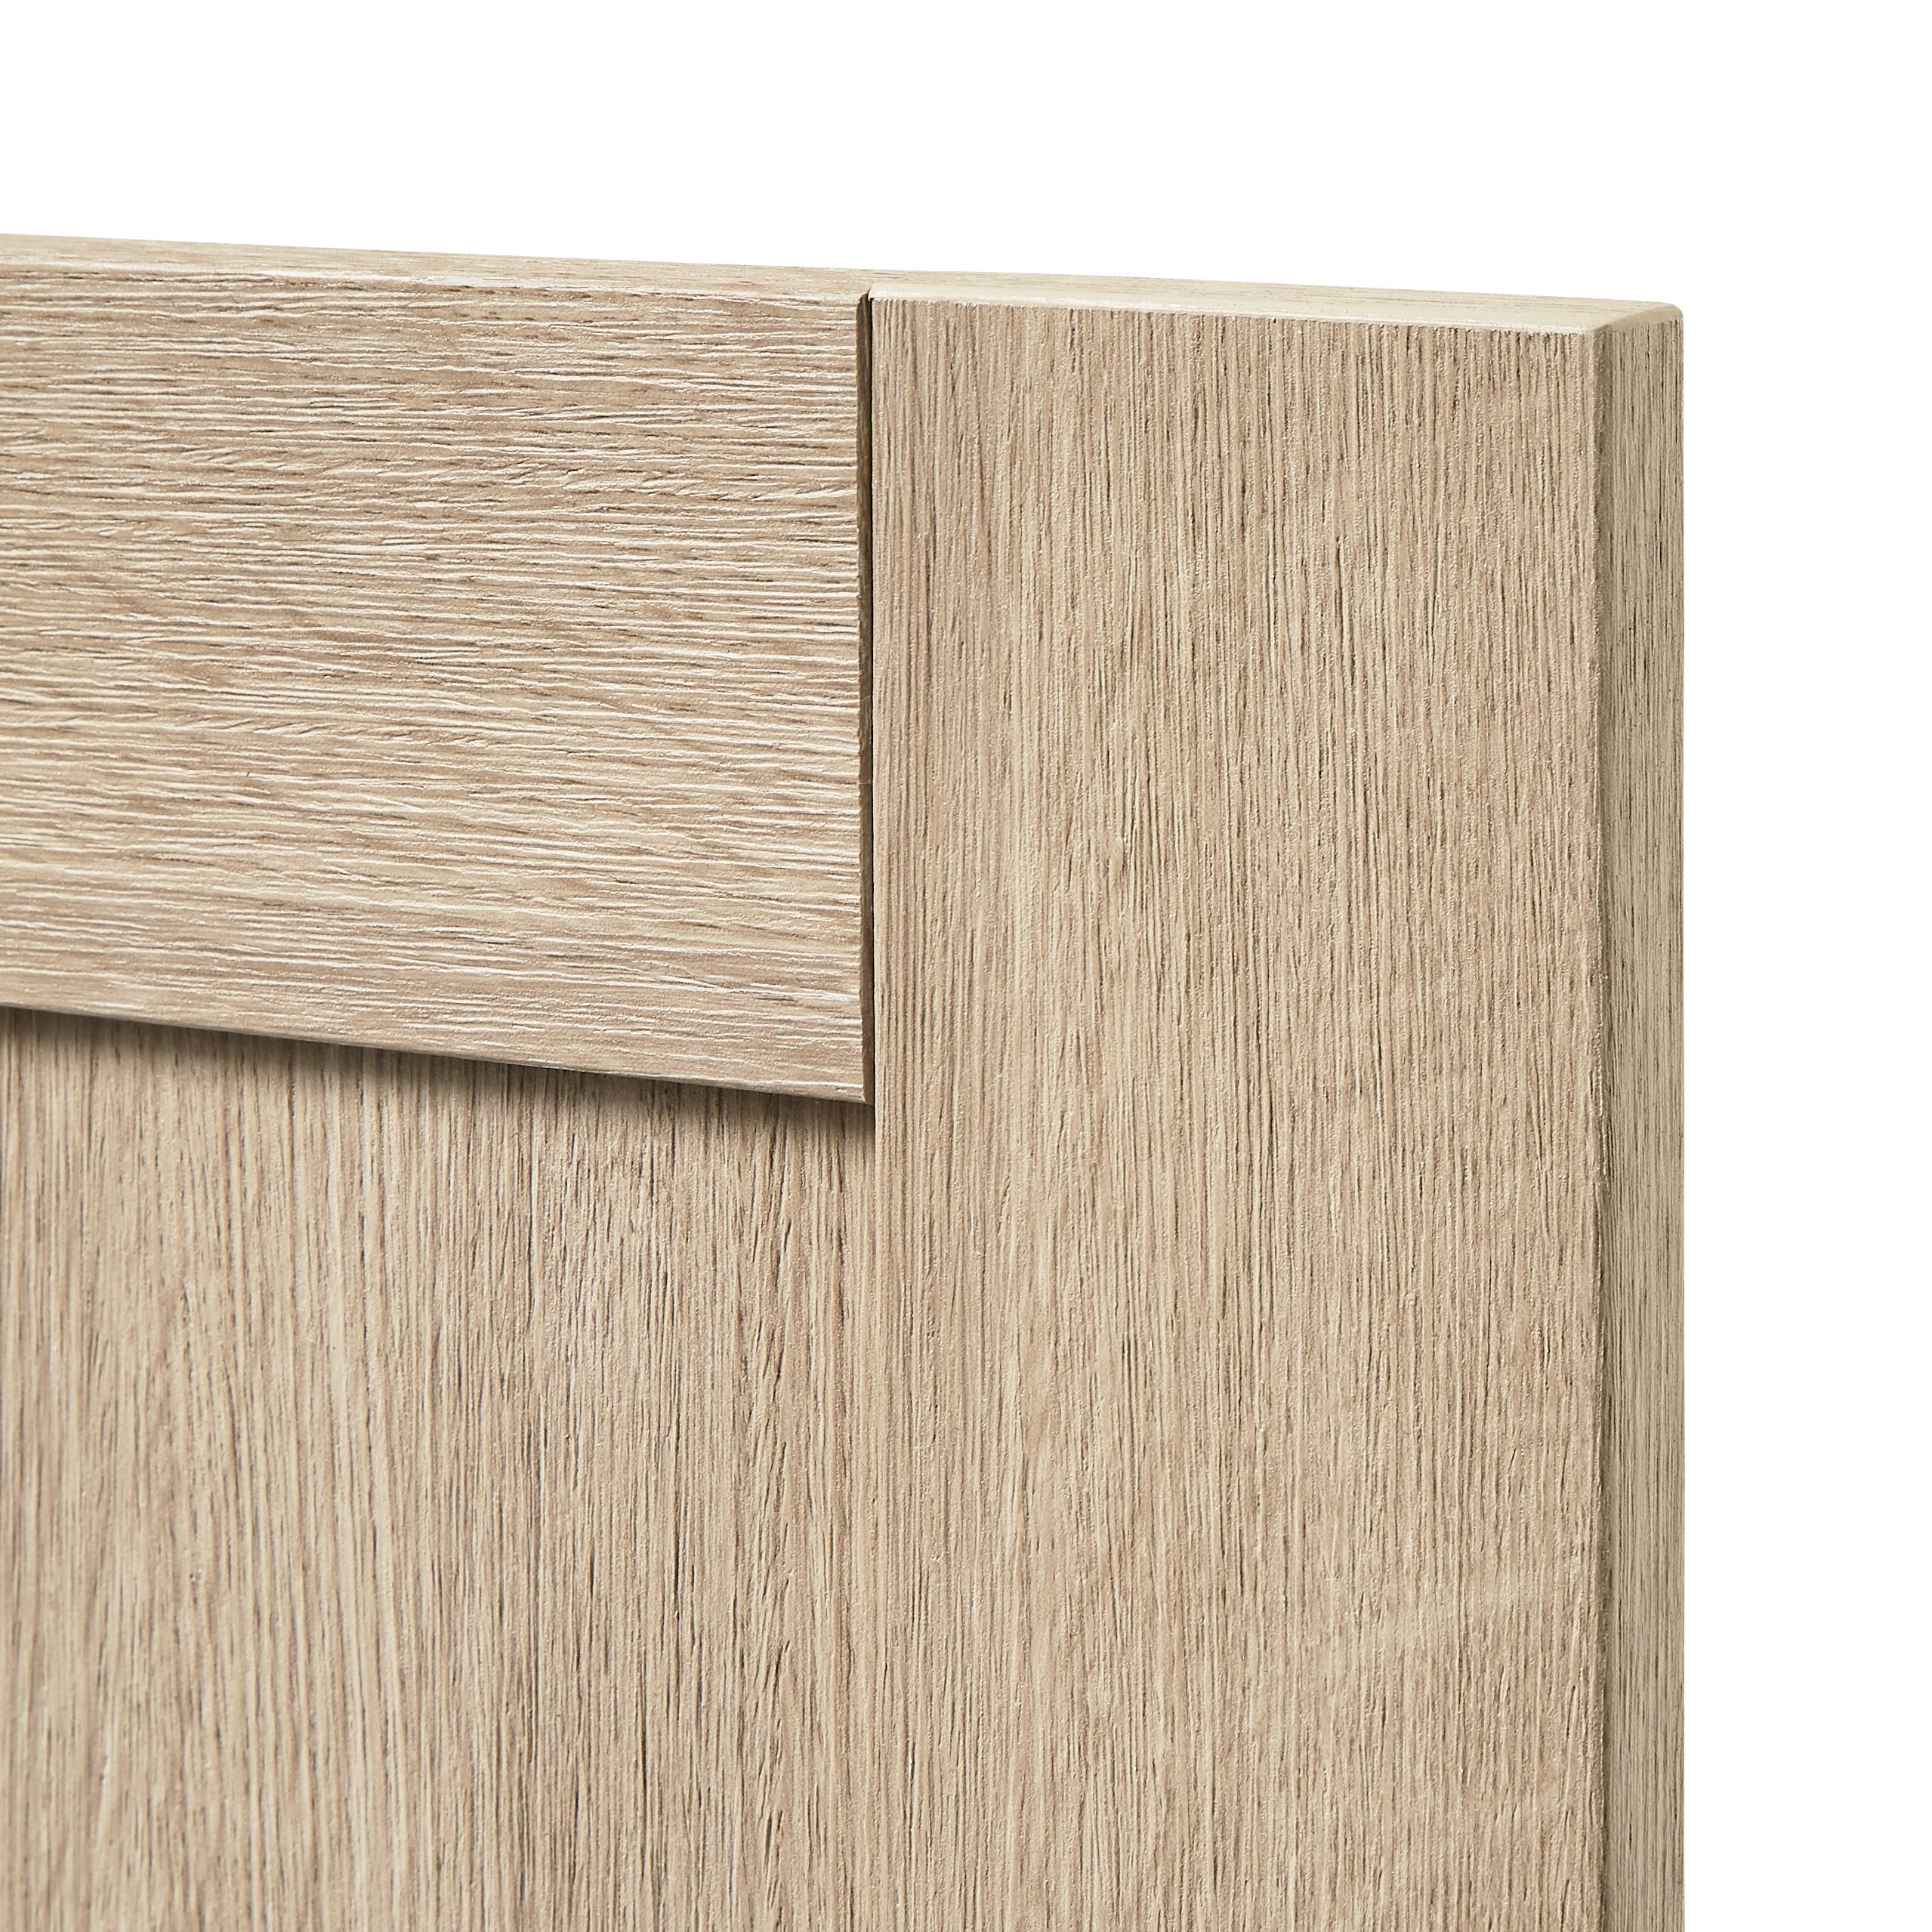 GoodHome Alpinia Oak effect shaker Drawer front (W)500mm, Pack of 4